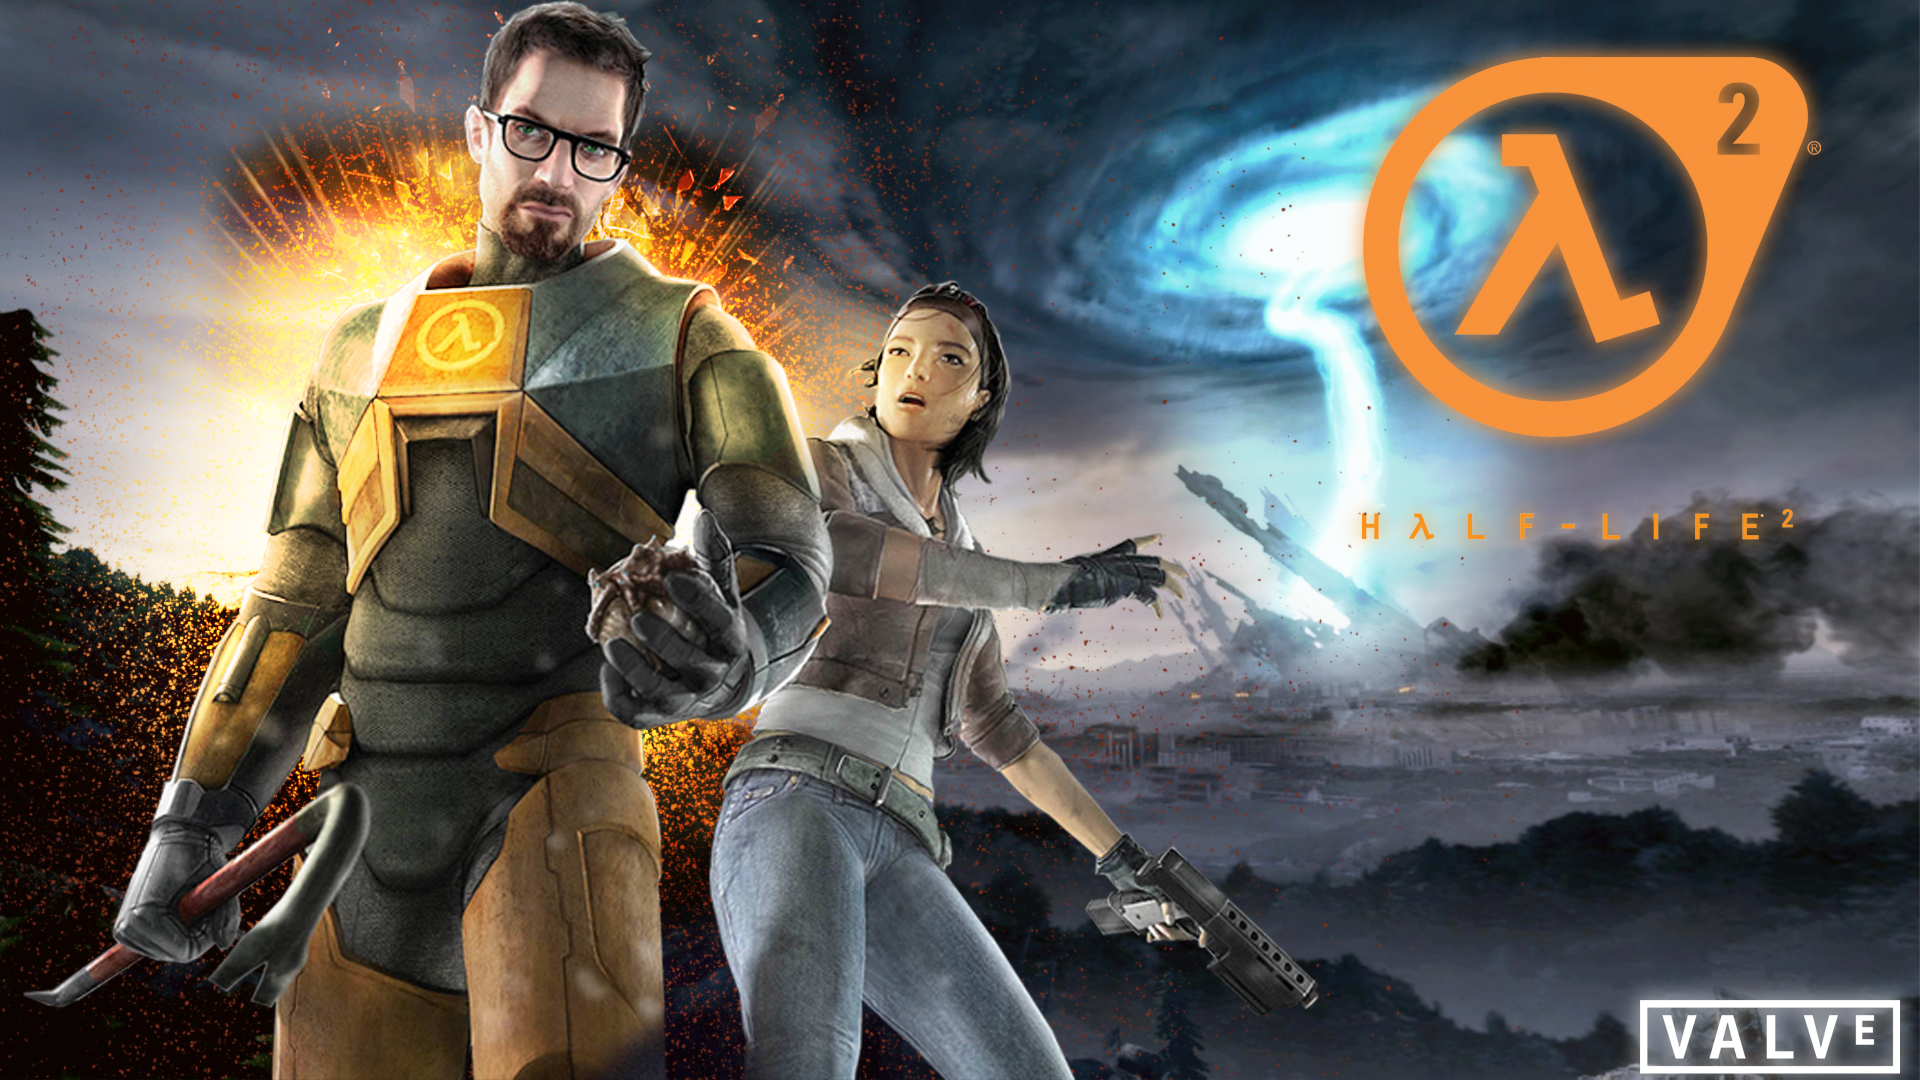 Half Life Wallpaper My Style By Karl97